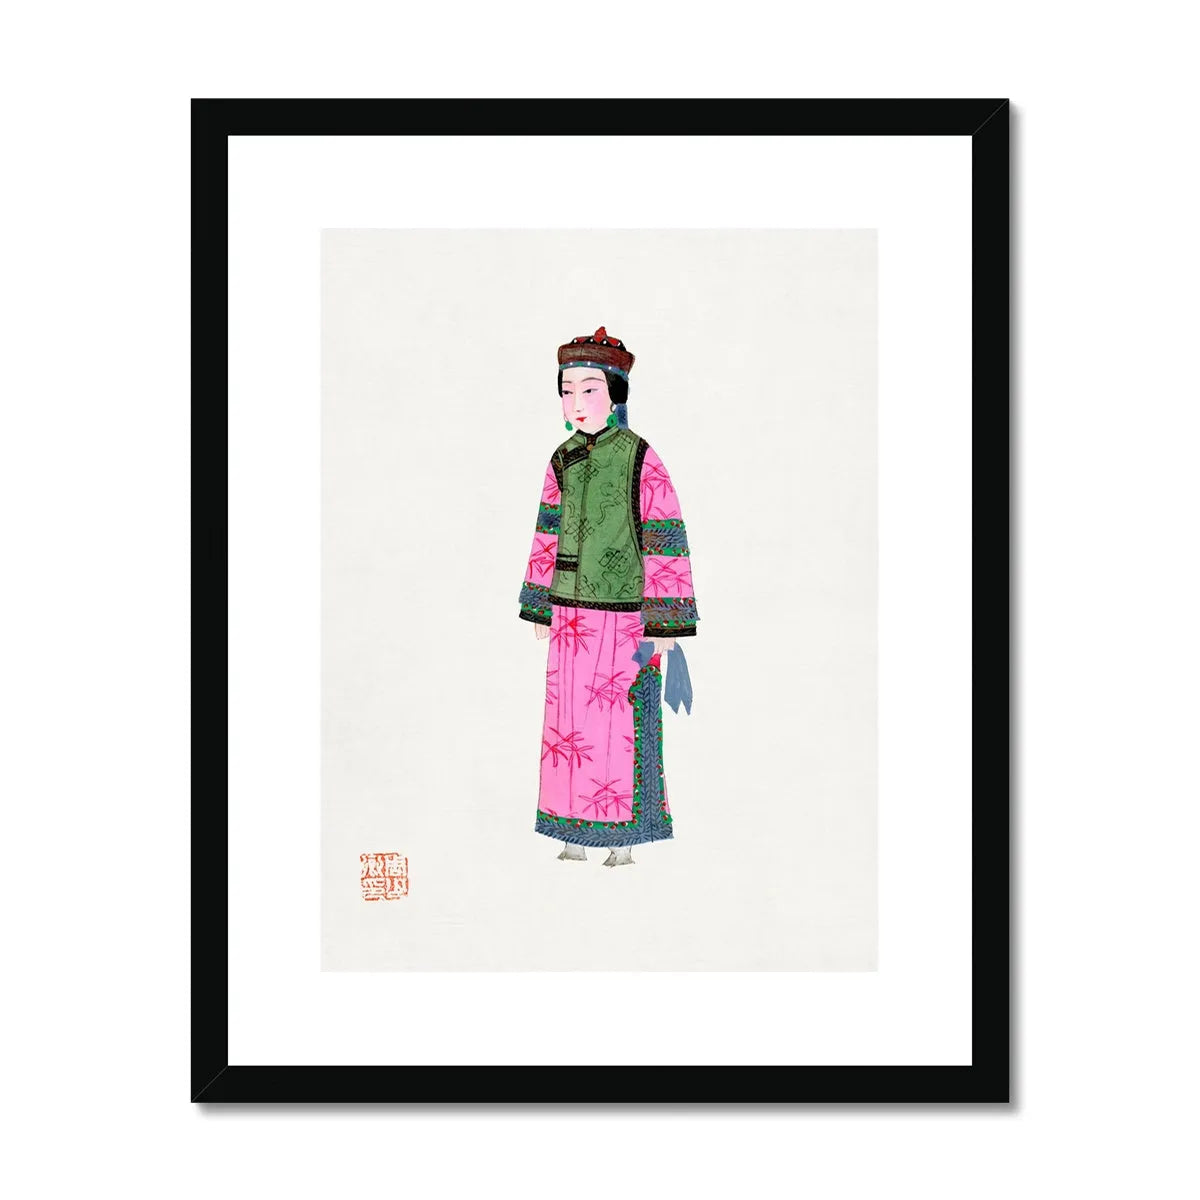 Chinese Noblewoman In Winter Framed & Mounted Print - 16’x20’ / Black Frame - Posters Prints & Visual Artwork